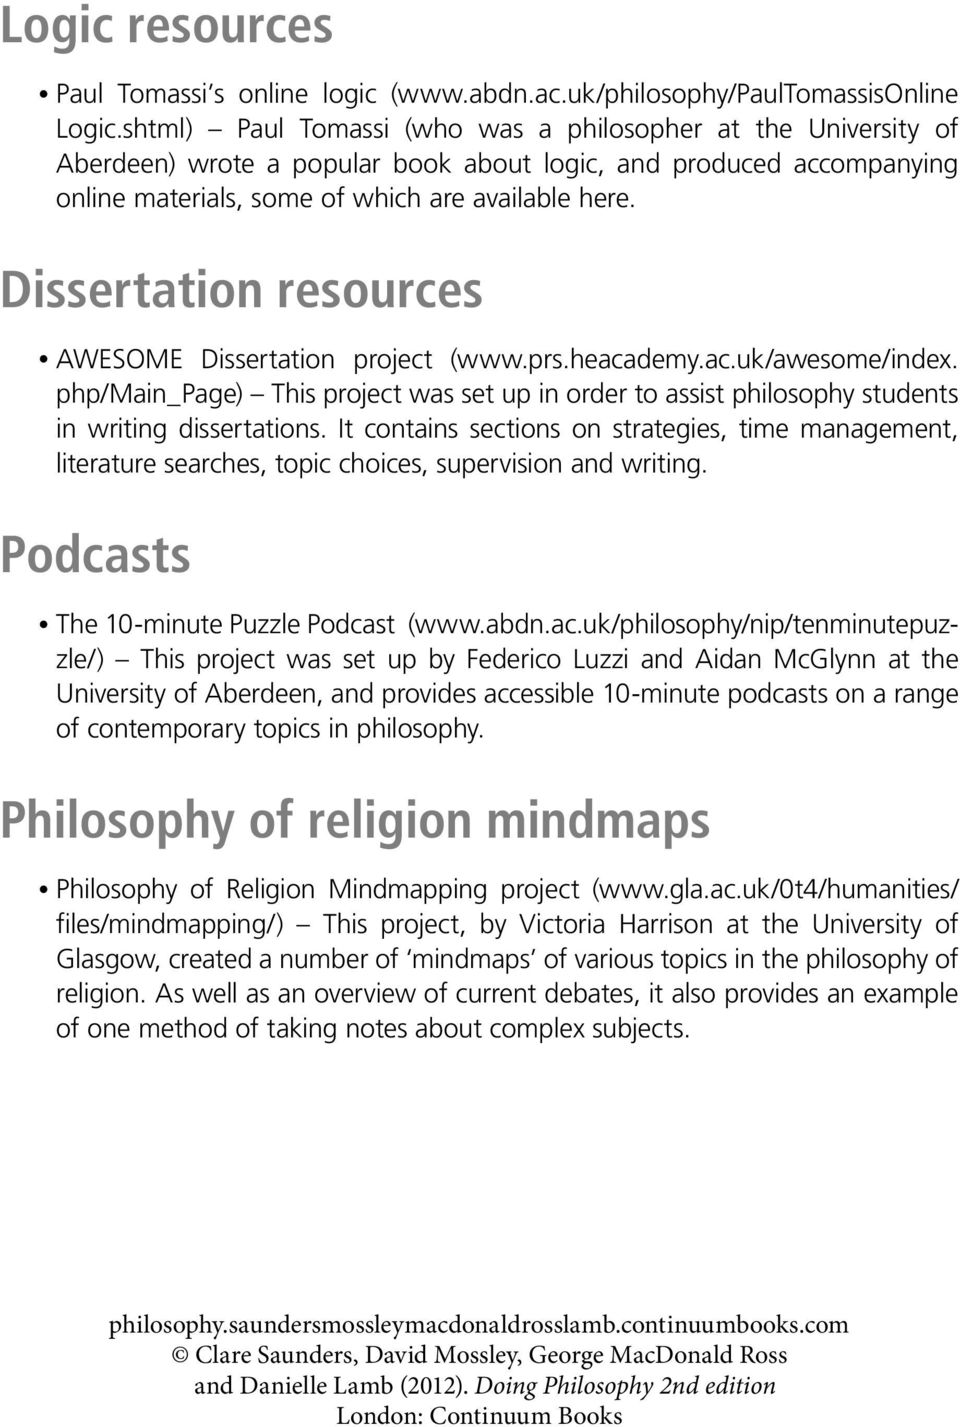 Dissertation resources AWESOME Dissertation project (www.prs.heacademy.ac.uk/ awesome/index. php/main_page) This project was set up in order to assist philosophy students in writing dissertations.